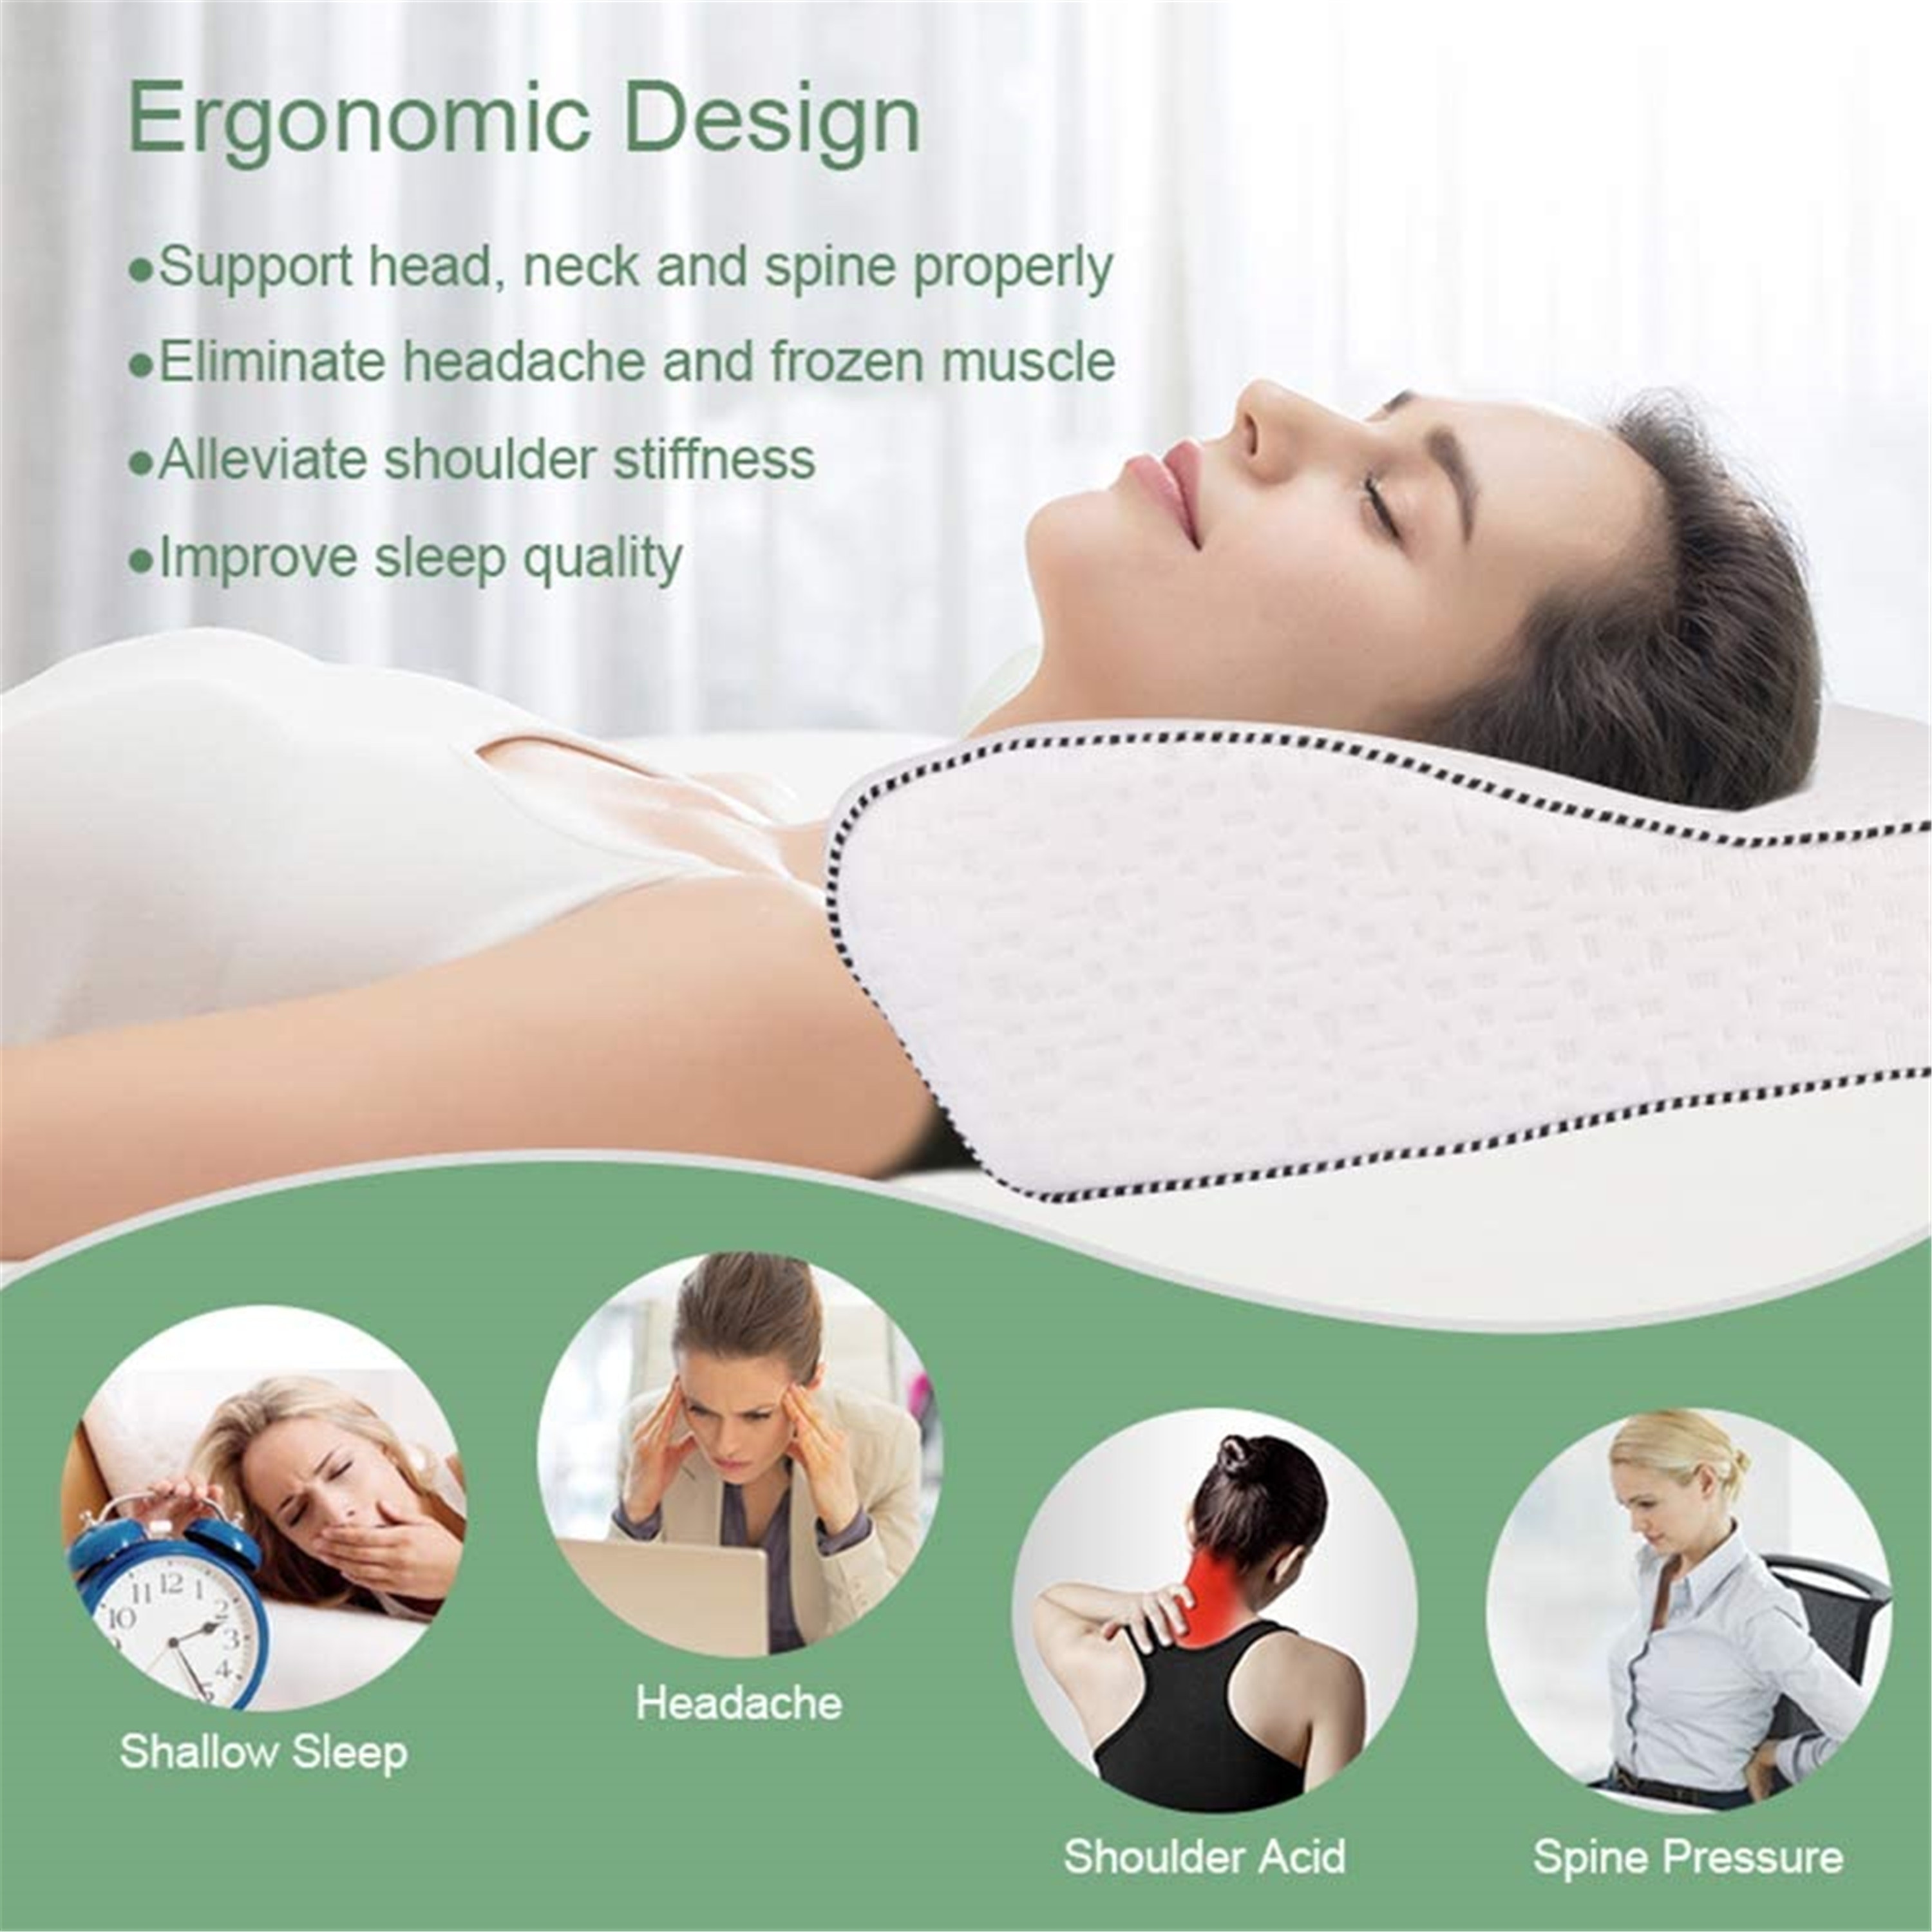 https://ak1.ostkcdn.com/images/products/is/images/direct/3a4f5ad0fa182947d1931c9e3bcb5b10376651ac/birola-Posture-Pillows-for-Sleeping%2CCervical-Pillow-for-Neck-Pain-Pressure-Relief%2C%2CBack-Sleeper-and-Stomach-Sleeper.jpg